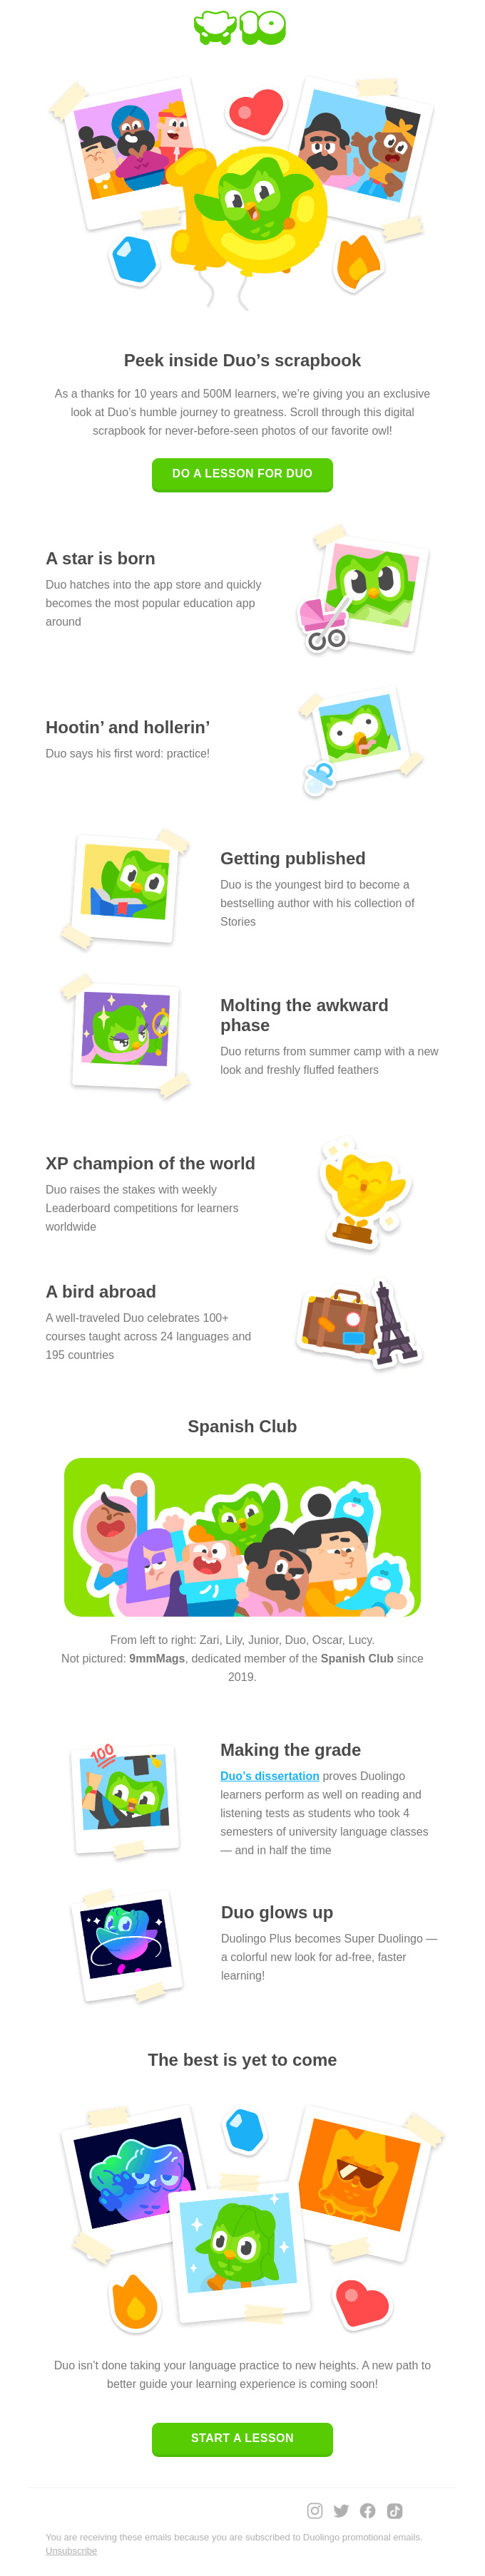 EXCLUSIVE: Embarrassing photos of Duo inside 😈 - Duolingo Email Newsletter